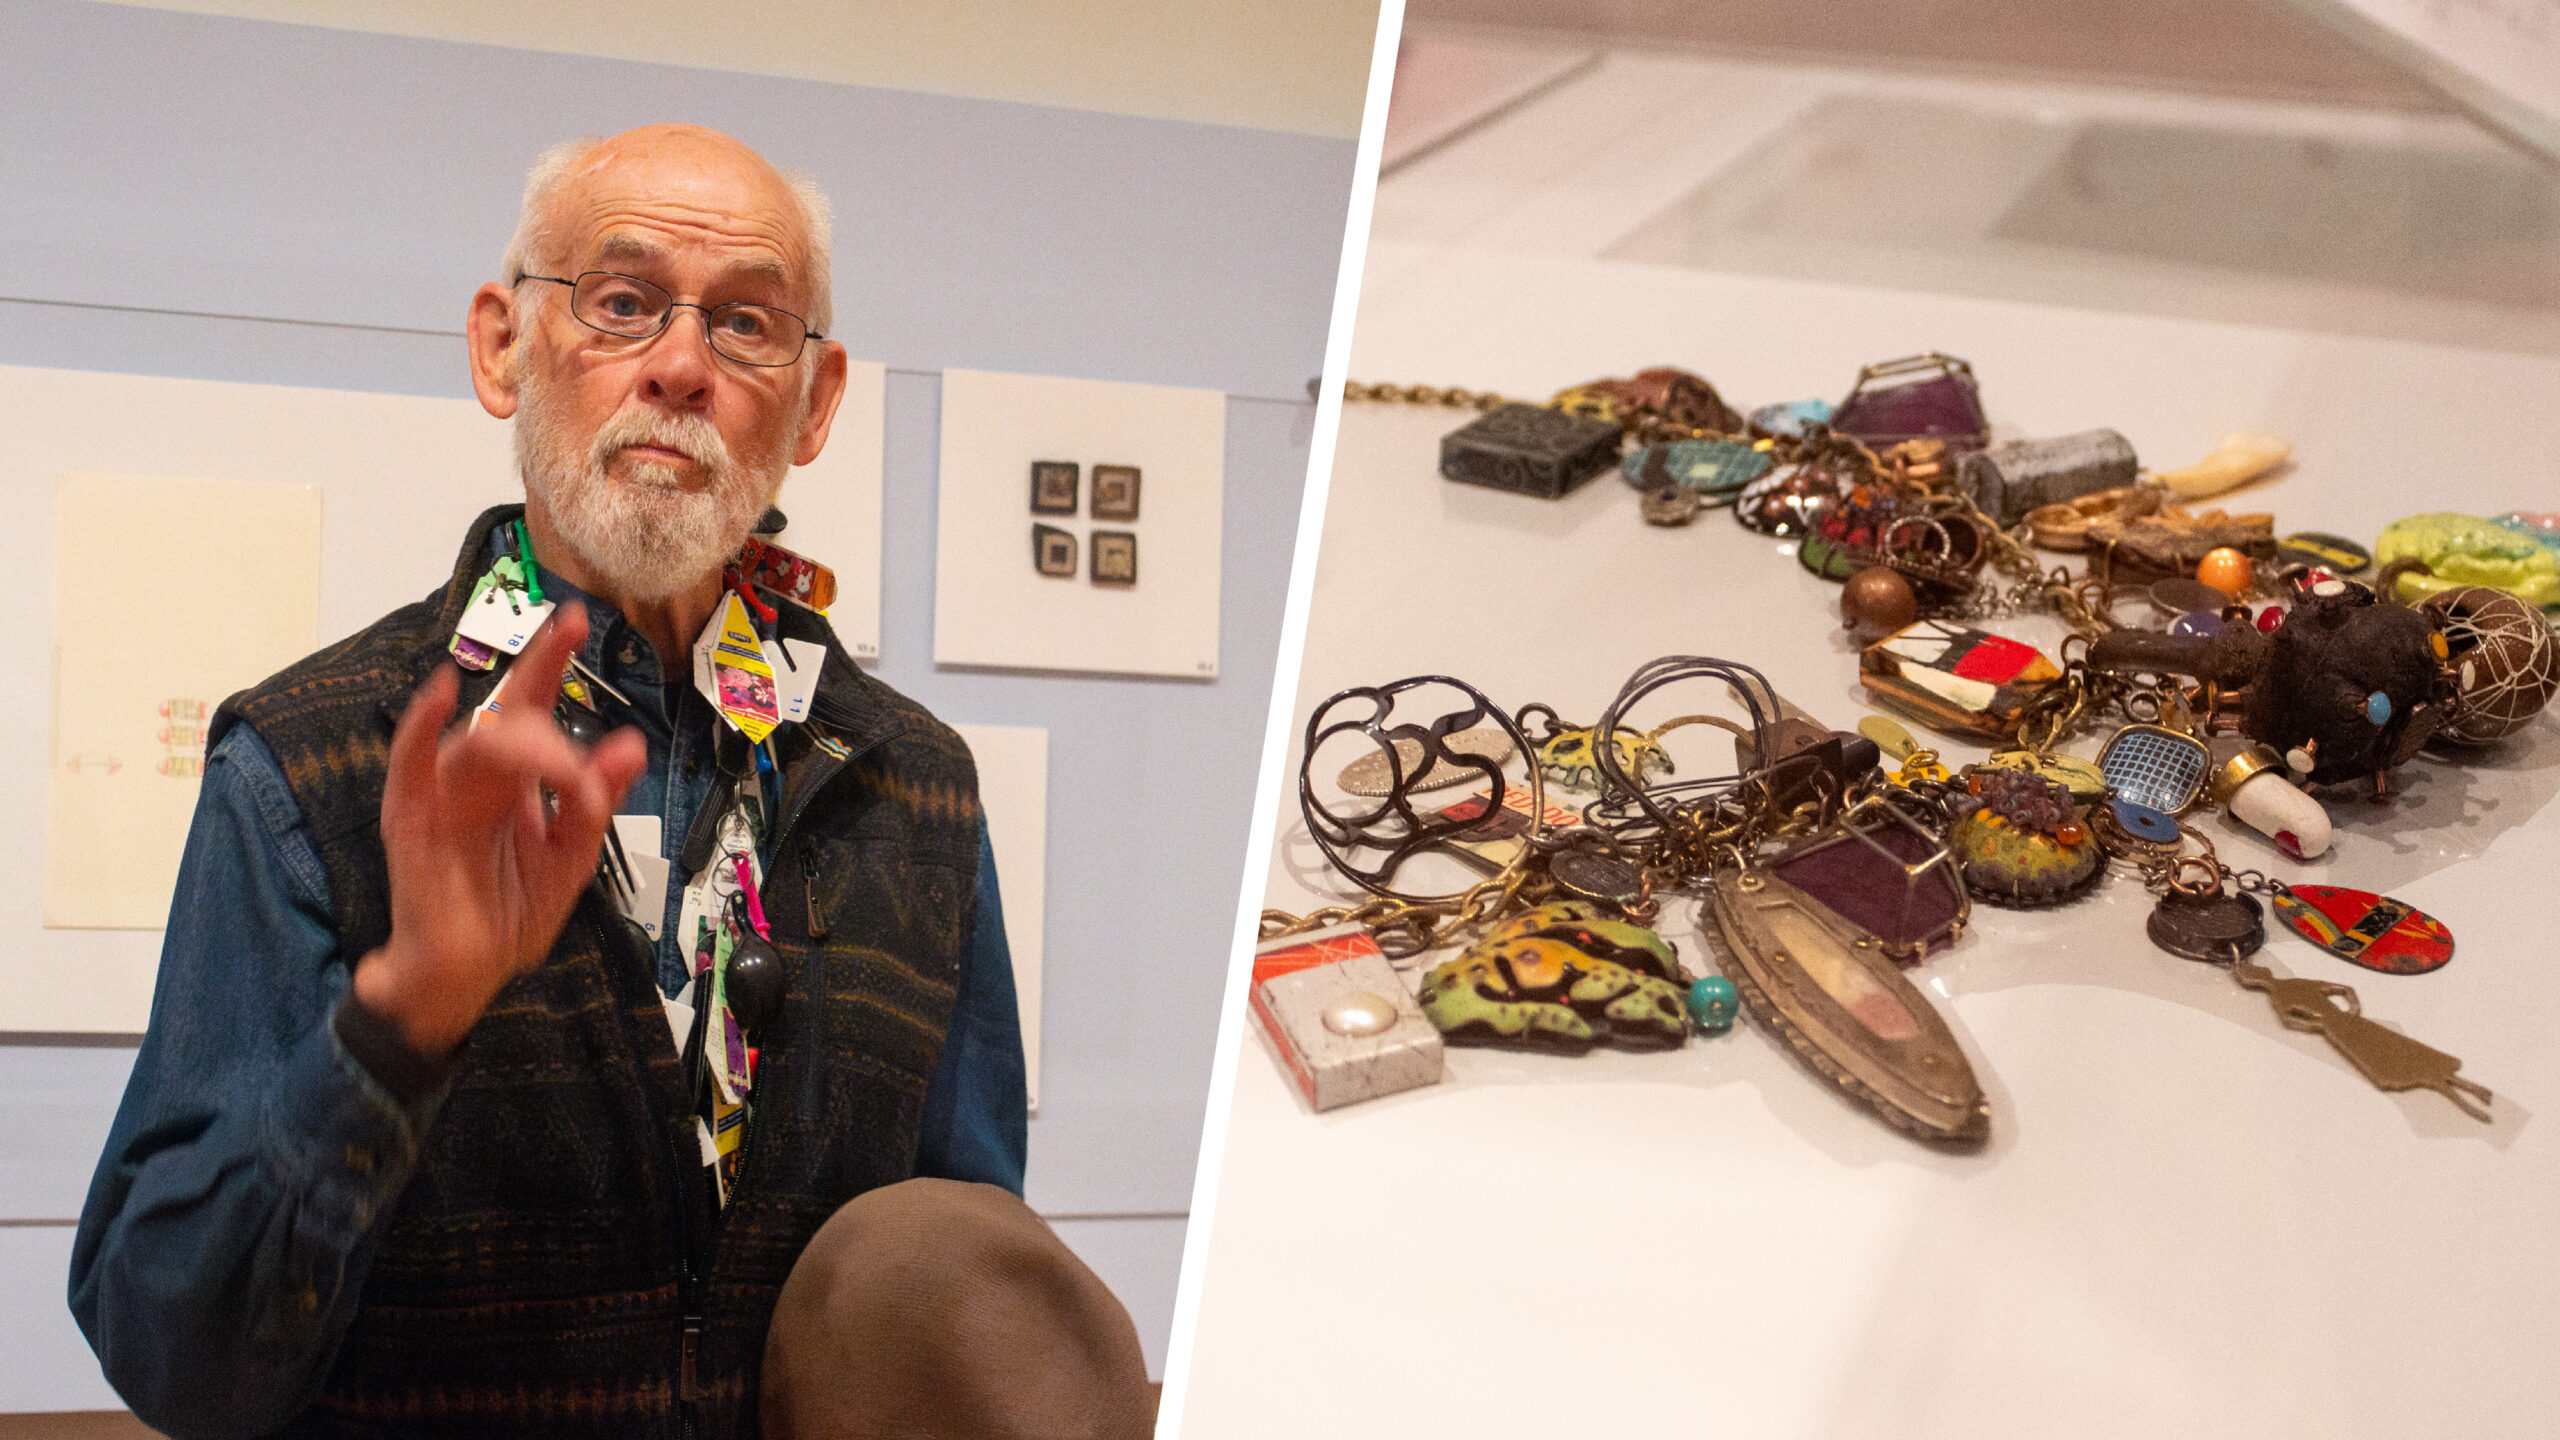 Artist Robert Ebendorf and an image of the work ECU Charm Necklace